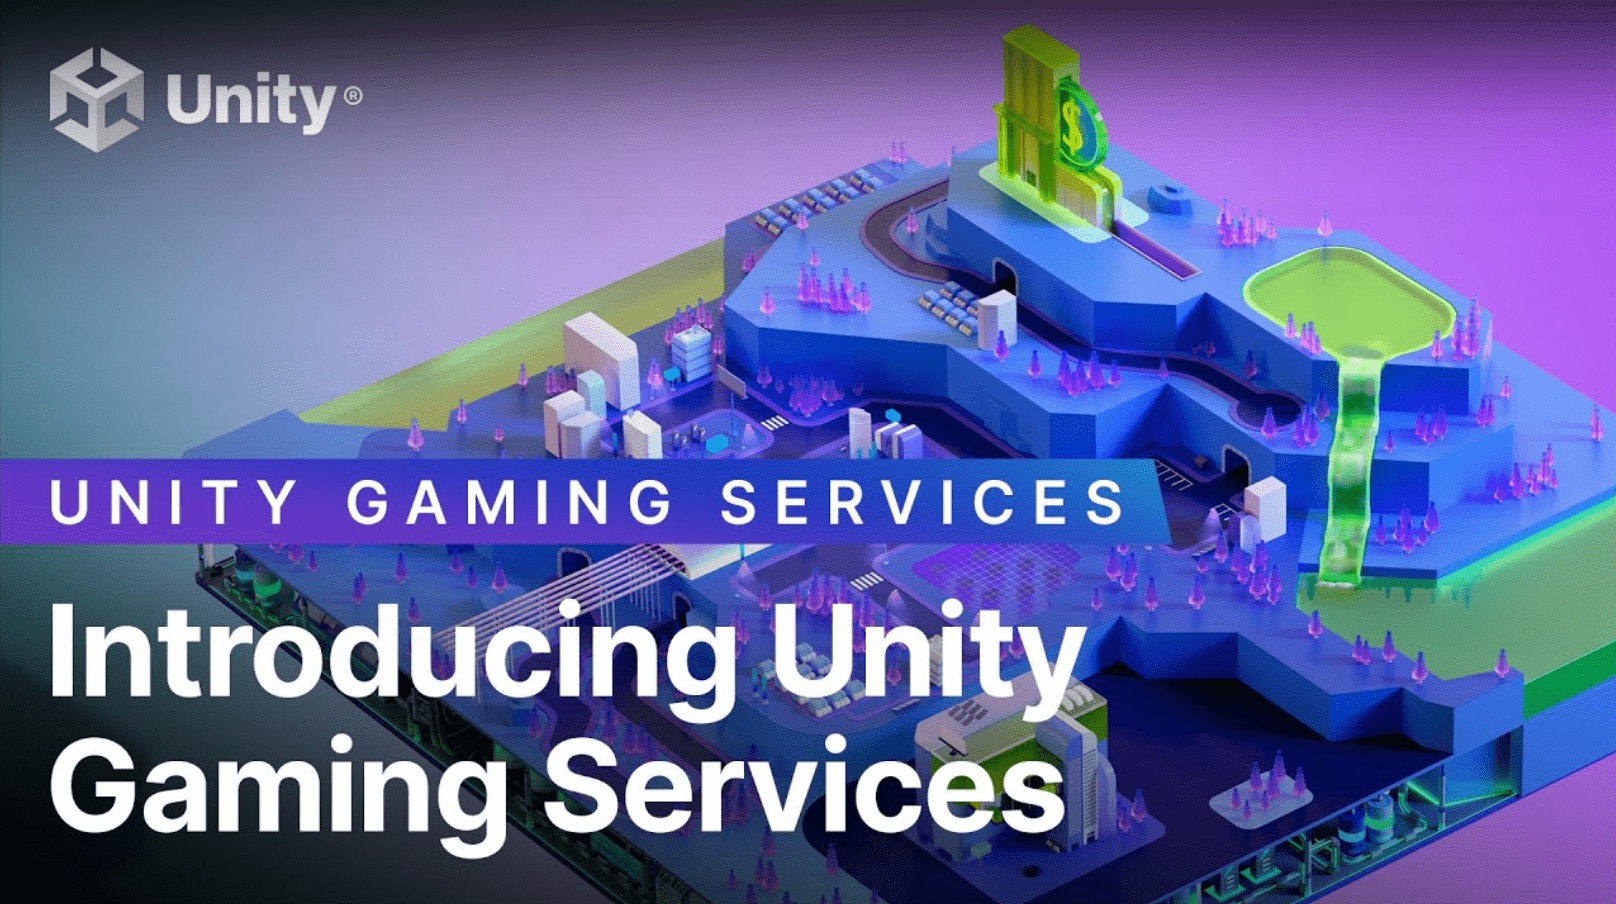 unity-gaming-services